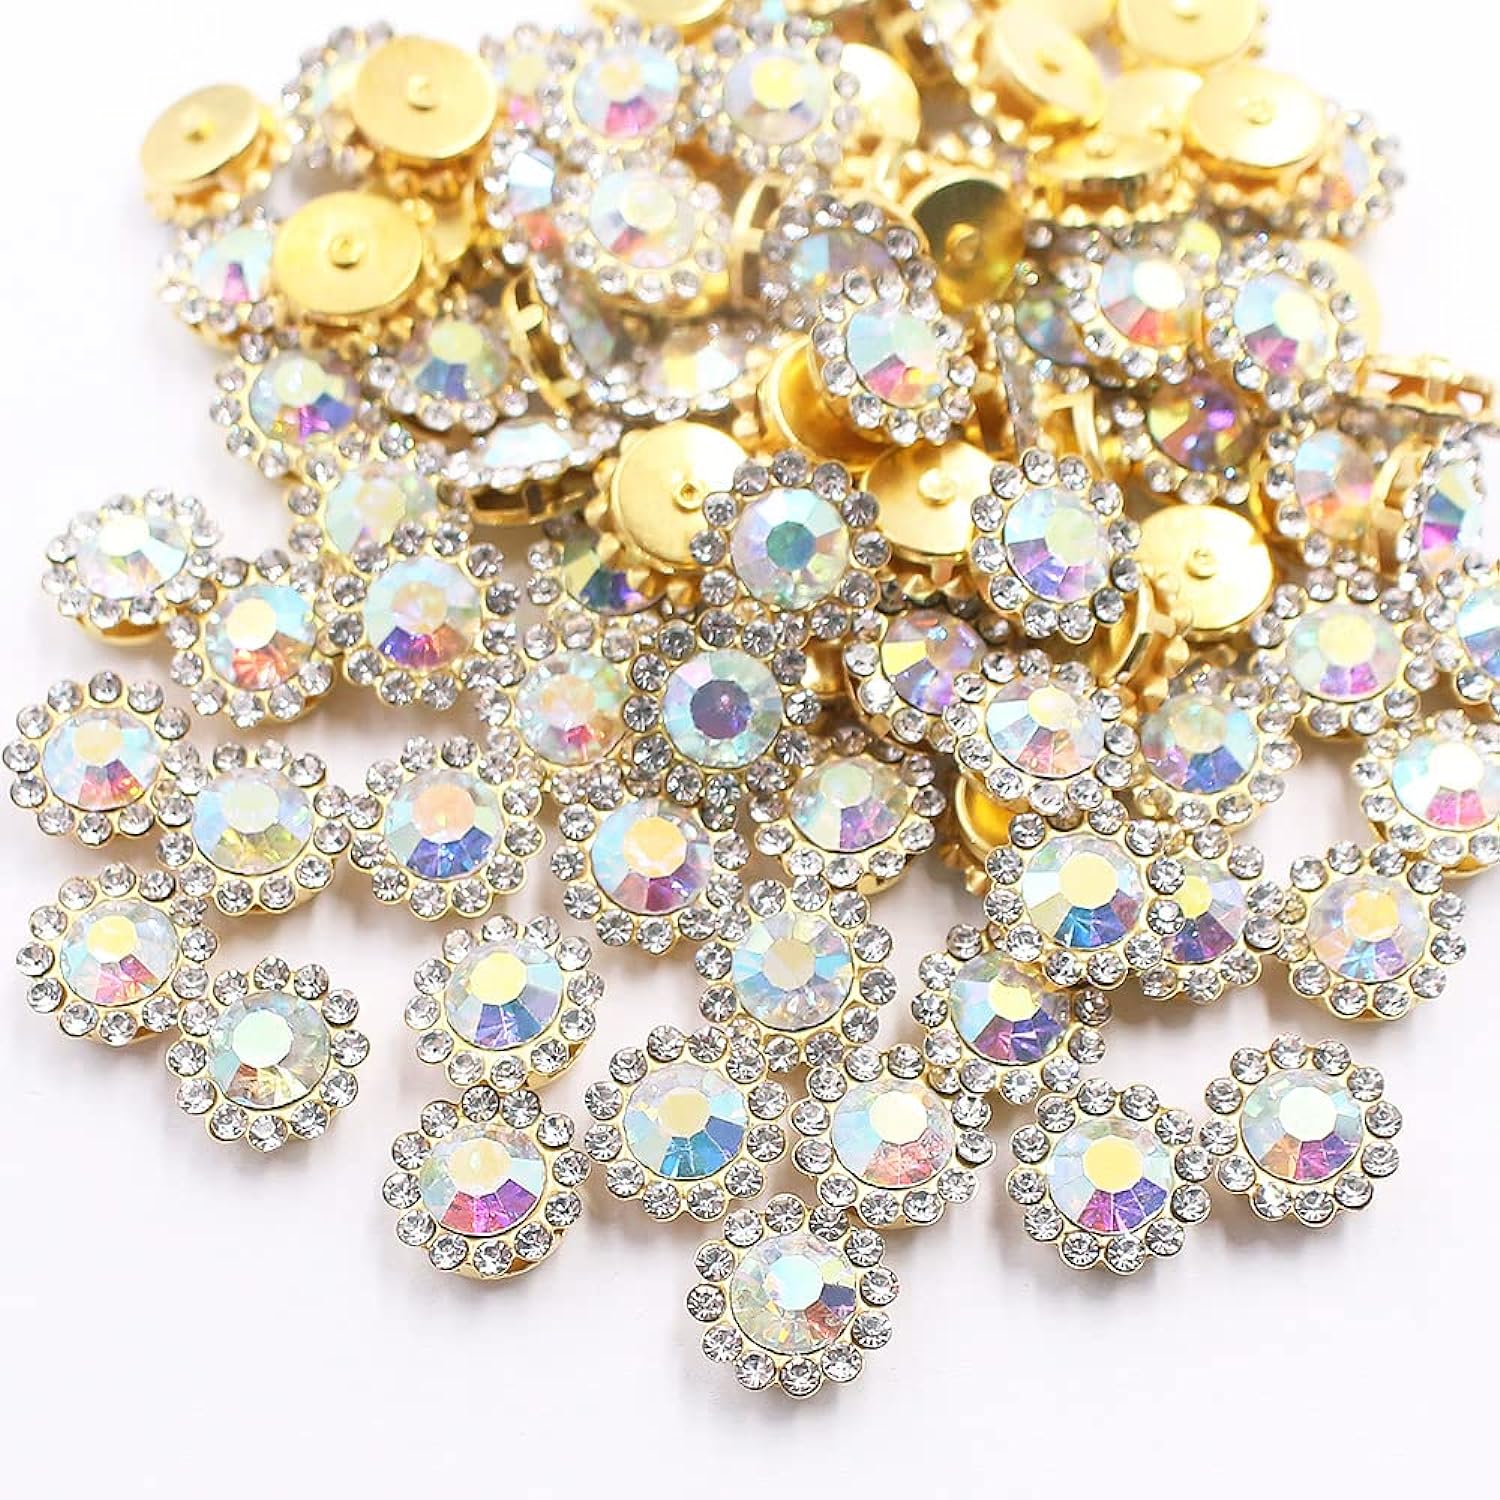 Great Choice Products 100Pcs Flower Claw Rhinestones Gold Base Crystals Stones Beads Trim Sew On Rhinestones For Clothes Sewing Accessories Crafts …